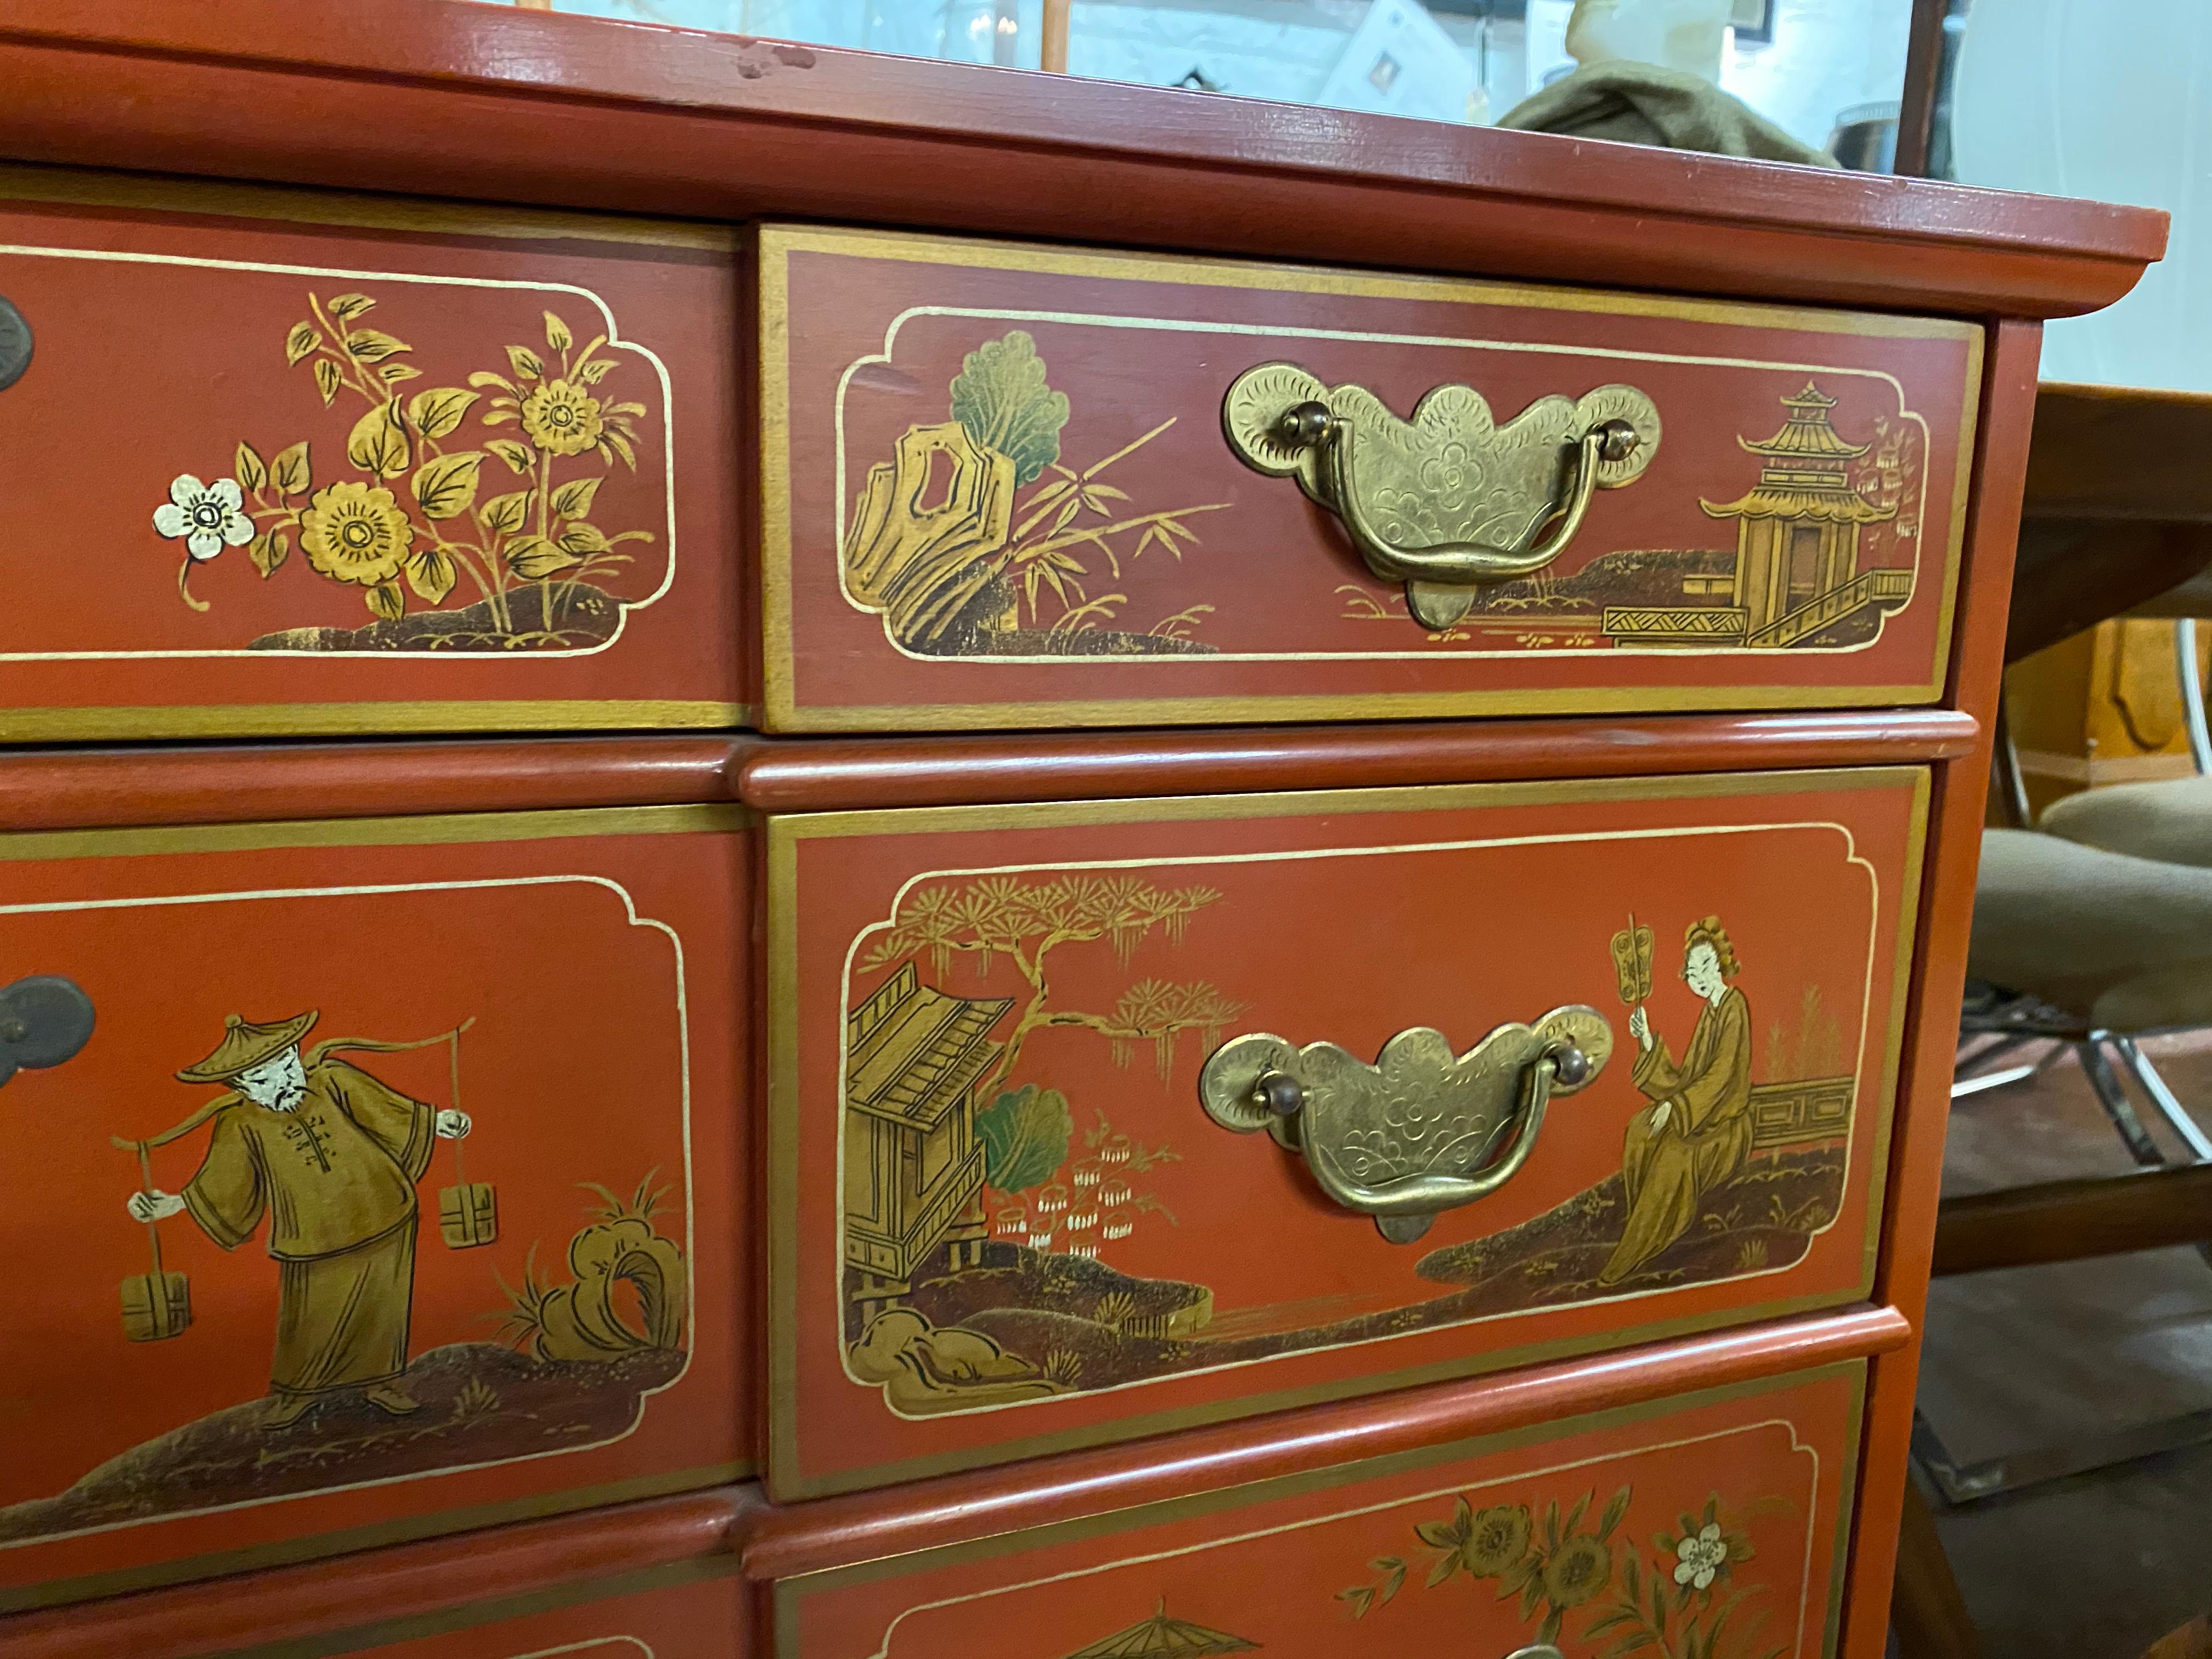 Chinese red chinoiserie chest of drawers by Baker Furniture, circa 1970s

Simply the best!

Baker Furniture Company chest of drawers. Made from solid wood and hand painted. The background is a Classic Chinese red (which has orange tones) and